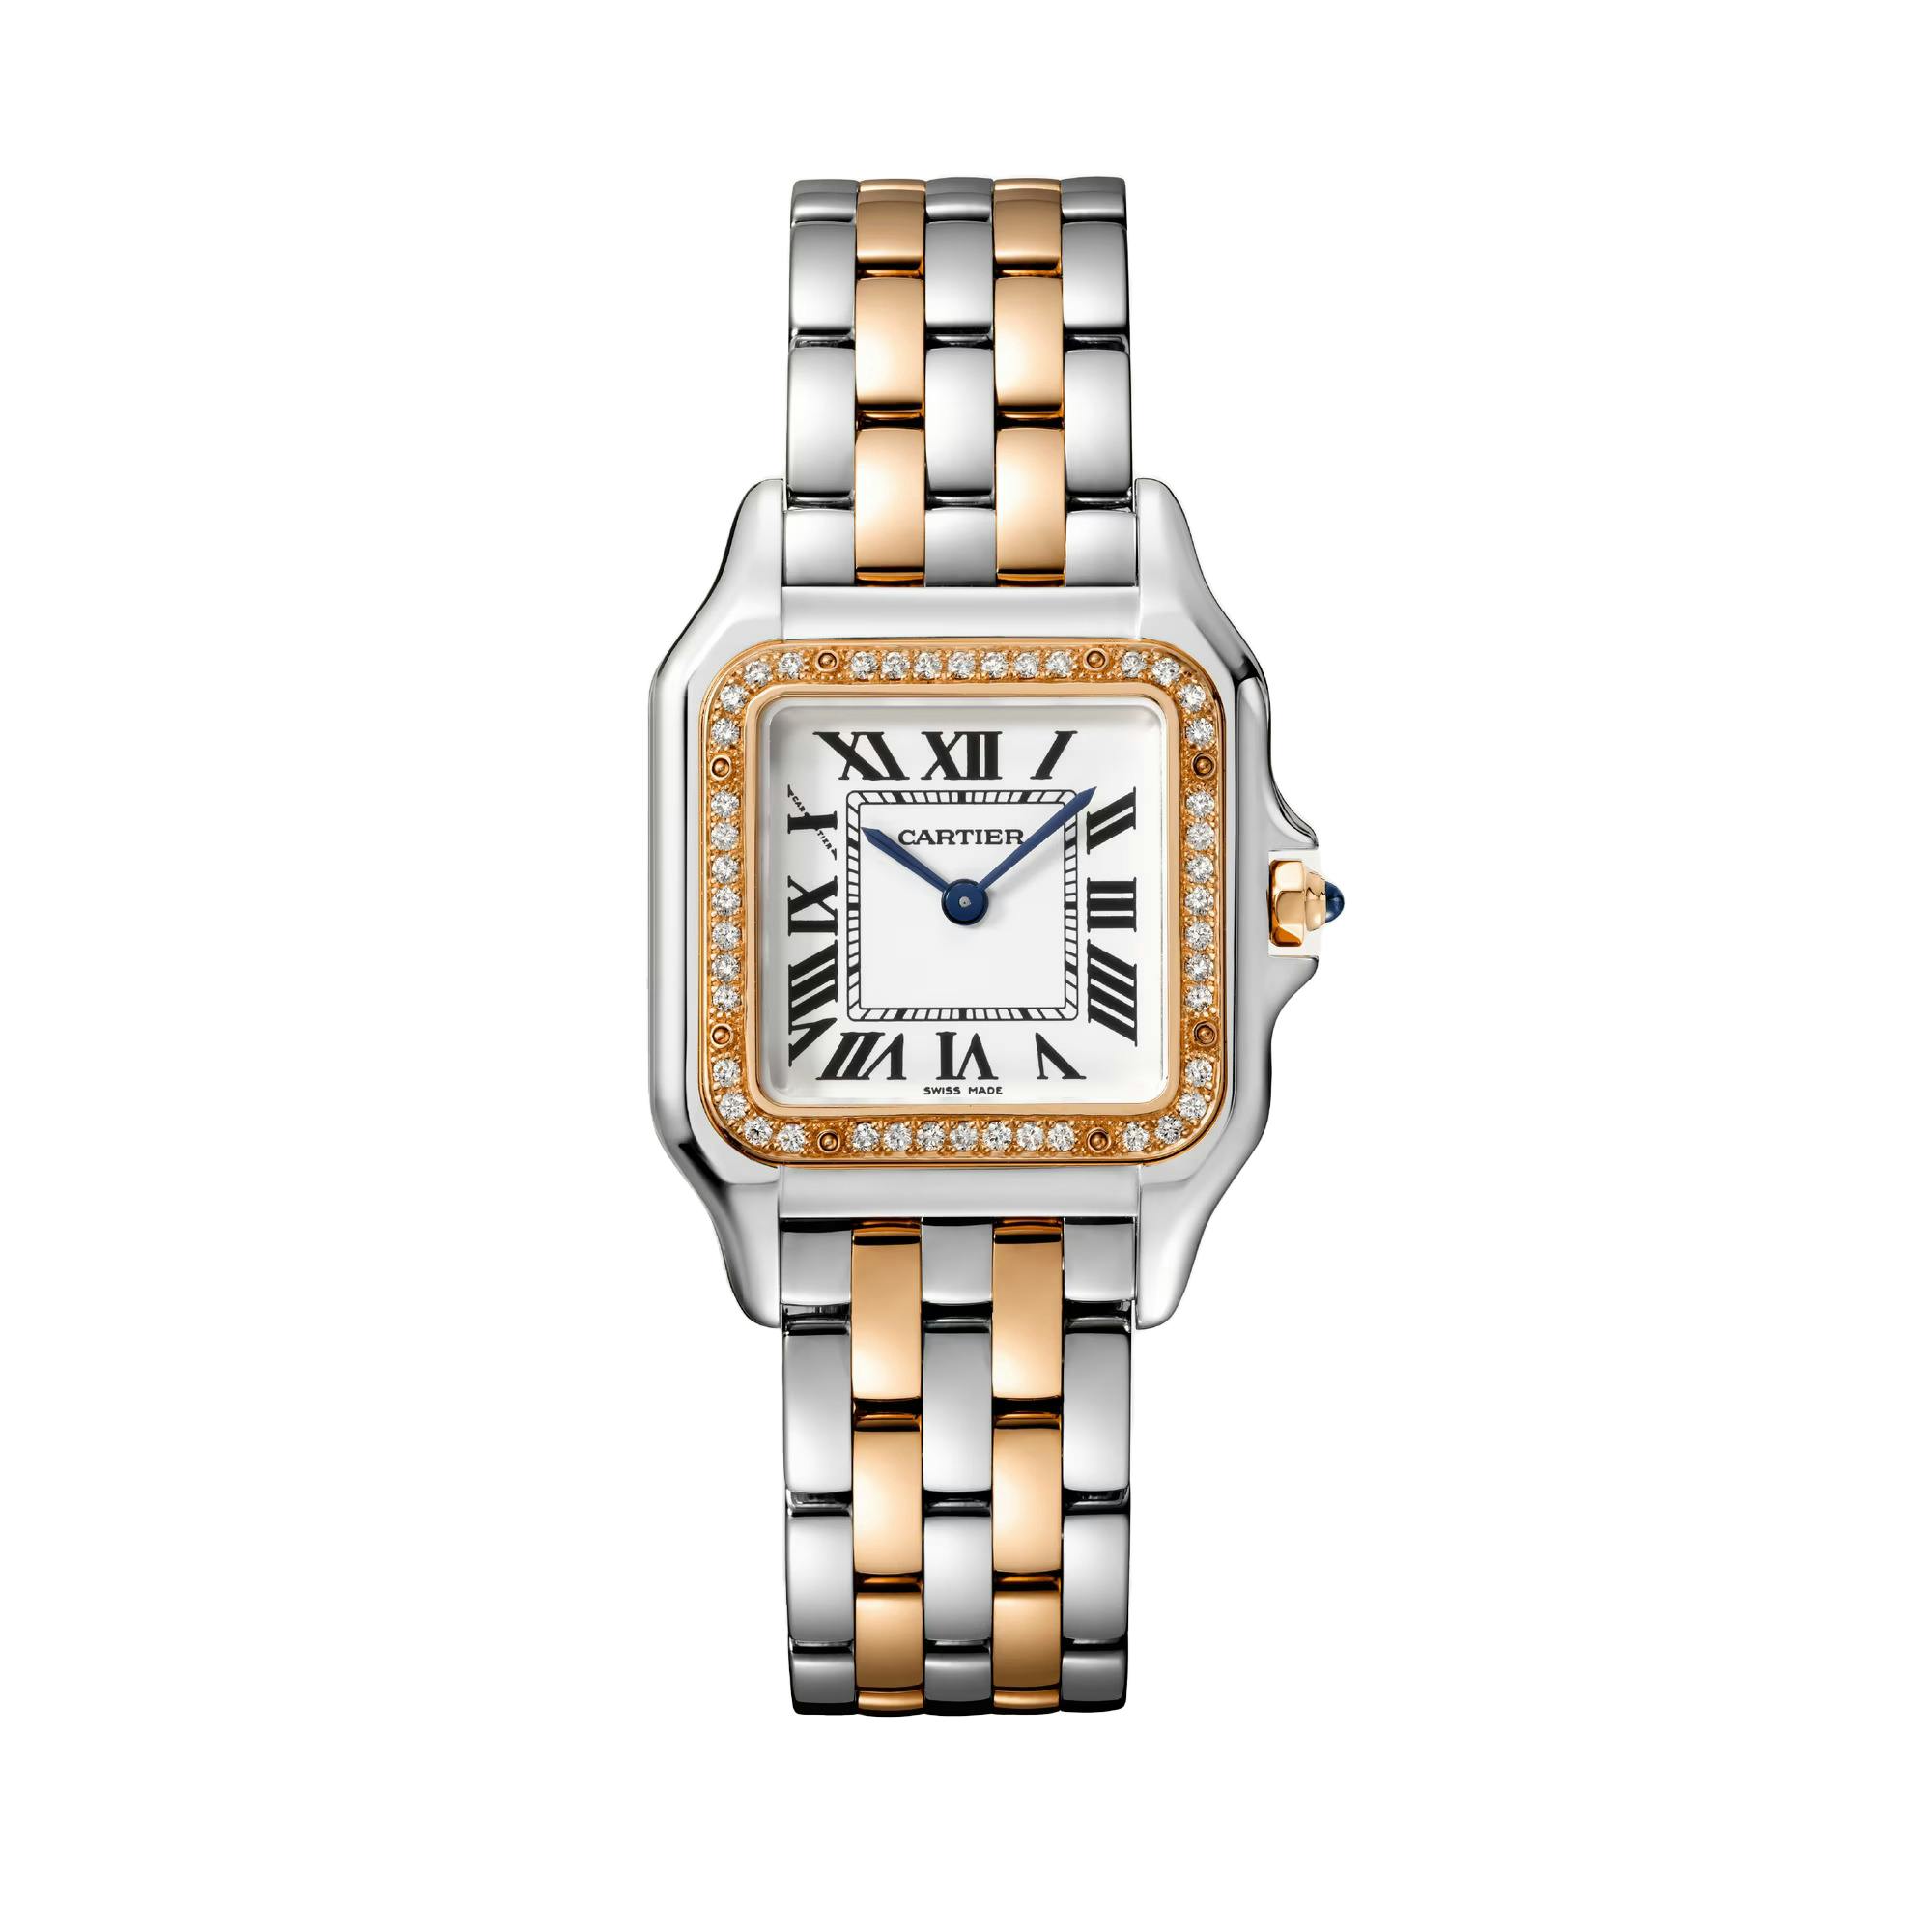 Panthere de Cartier Watch in Rose Gold with Diamonds 0